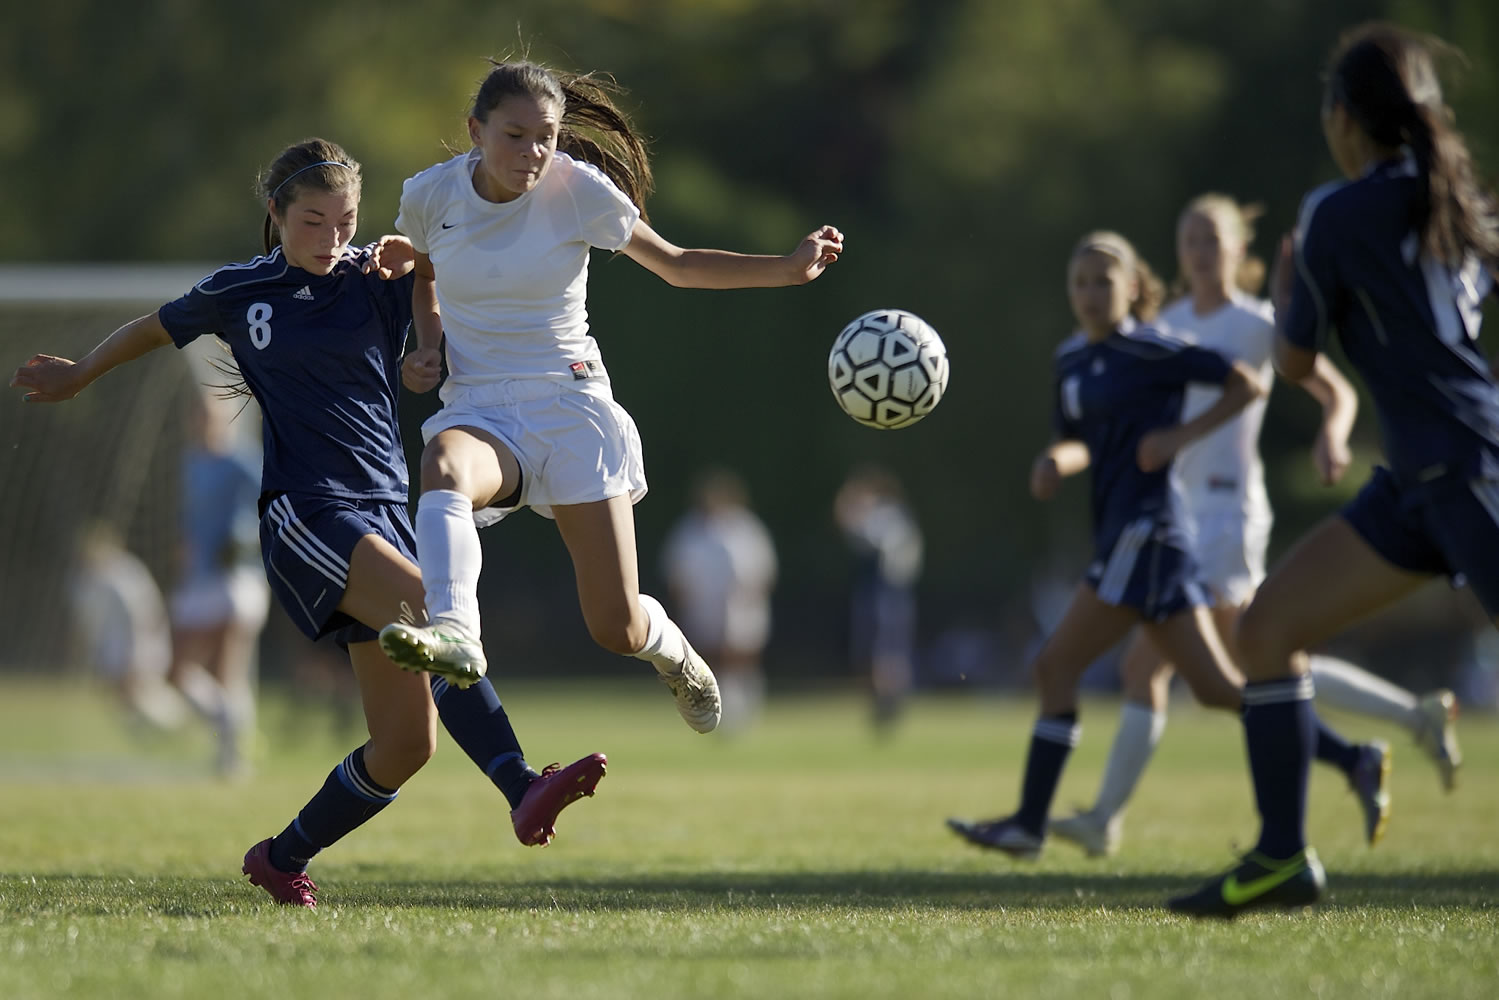 Taylor Halquist, 8, right, of Columbia River High School fights for control of the soccer ball against Maya Nicol, 8, of Hockinson High School in a game Tuesday September 4, 2012 in Vancouver, Washington.